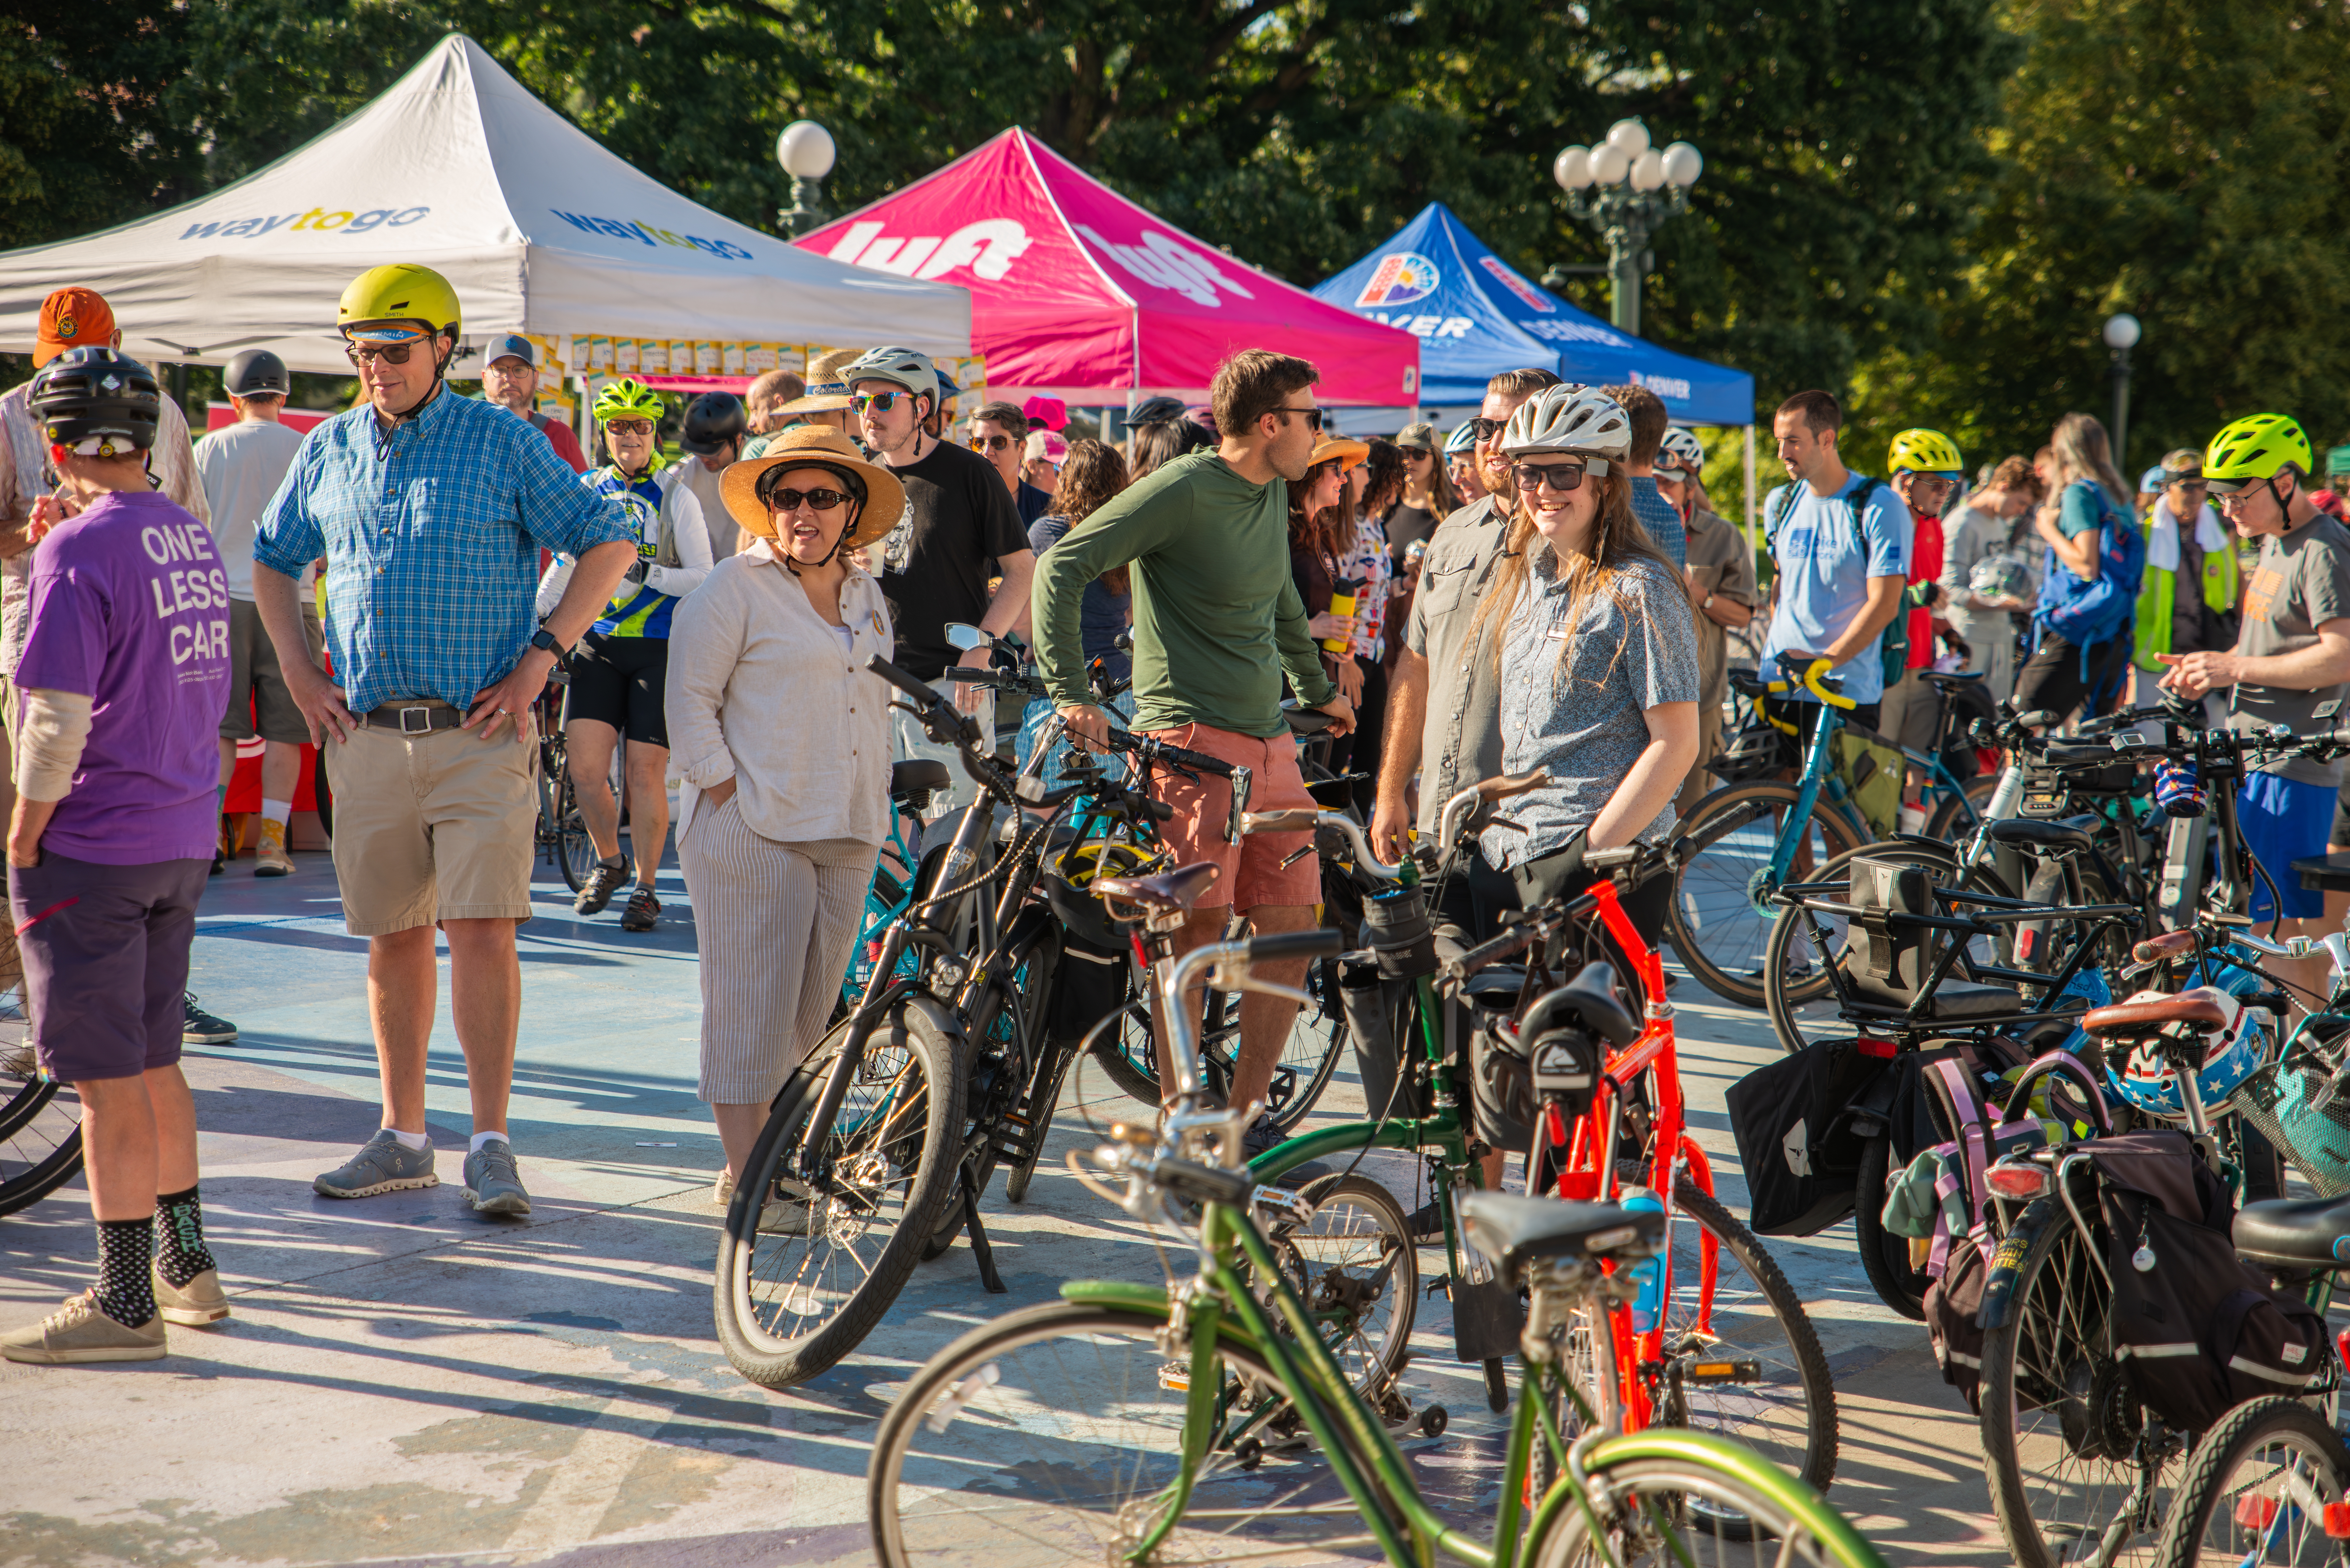 A group of people standing in together with their bicycle helmets and gear on. In the foreground of the image is a group of parked bicycles and in the background is booths set up for Bike to Work Day 2024.